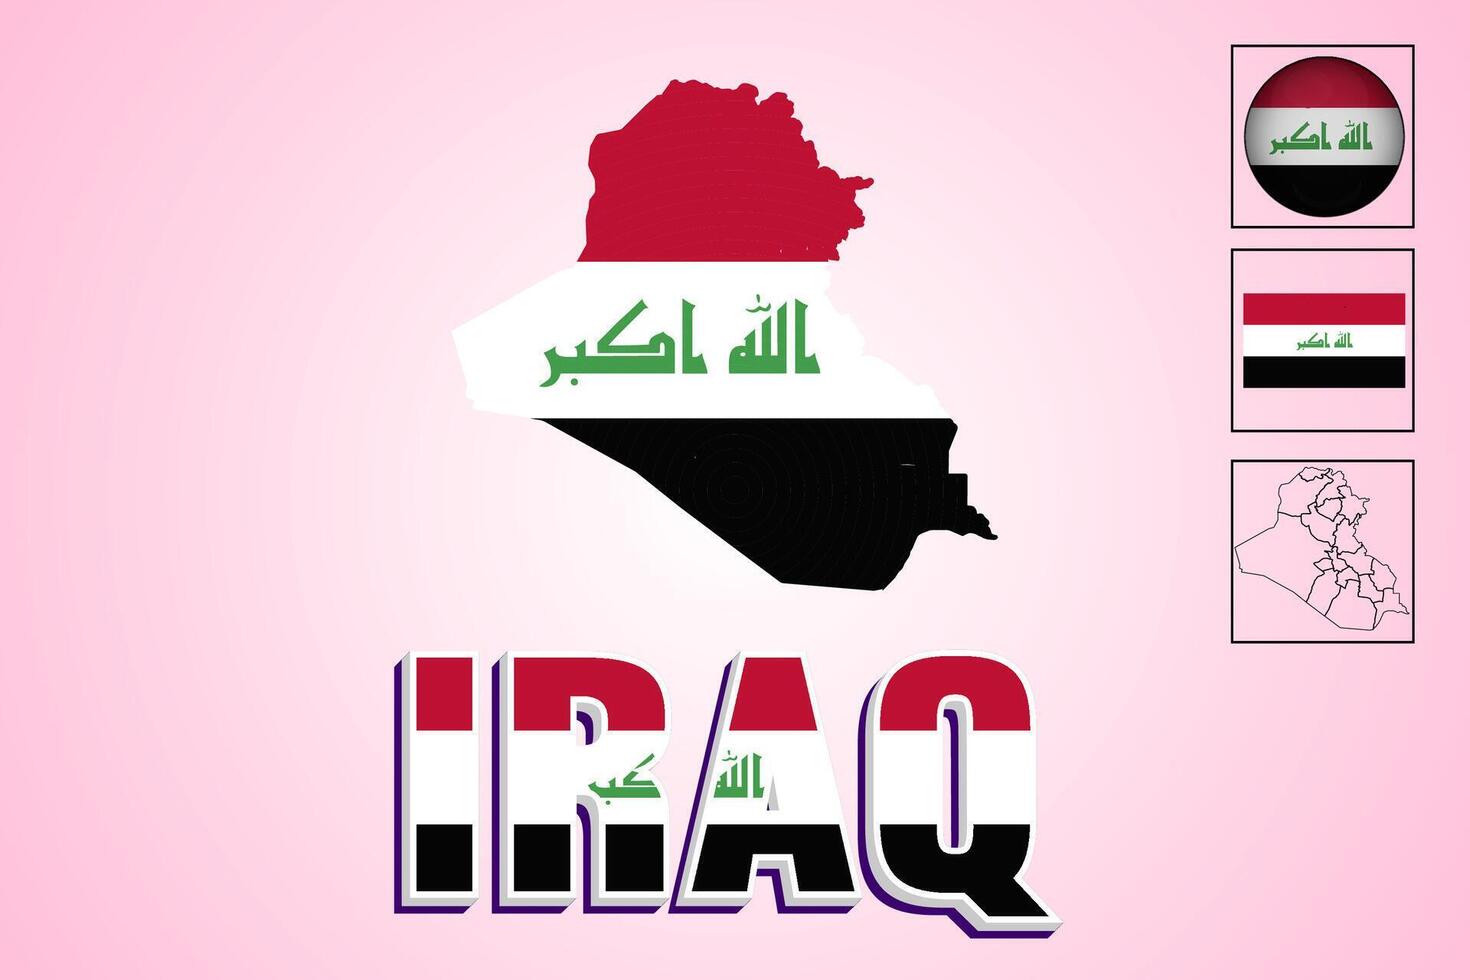 Iraqi flag and map created in vector